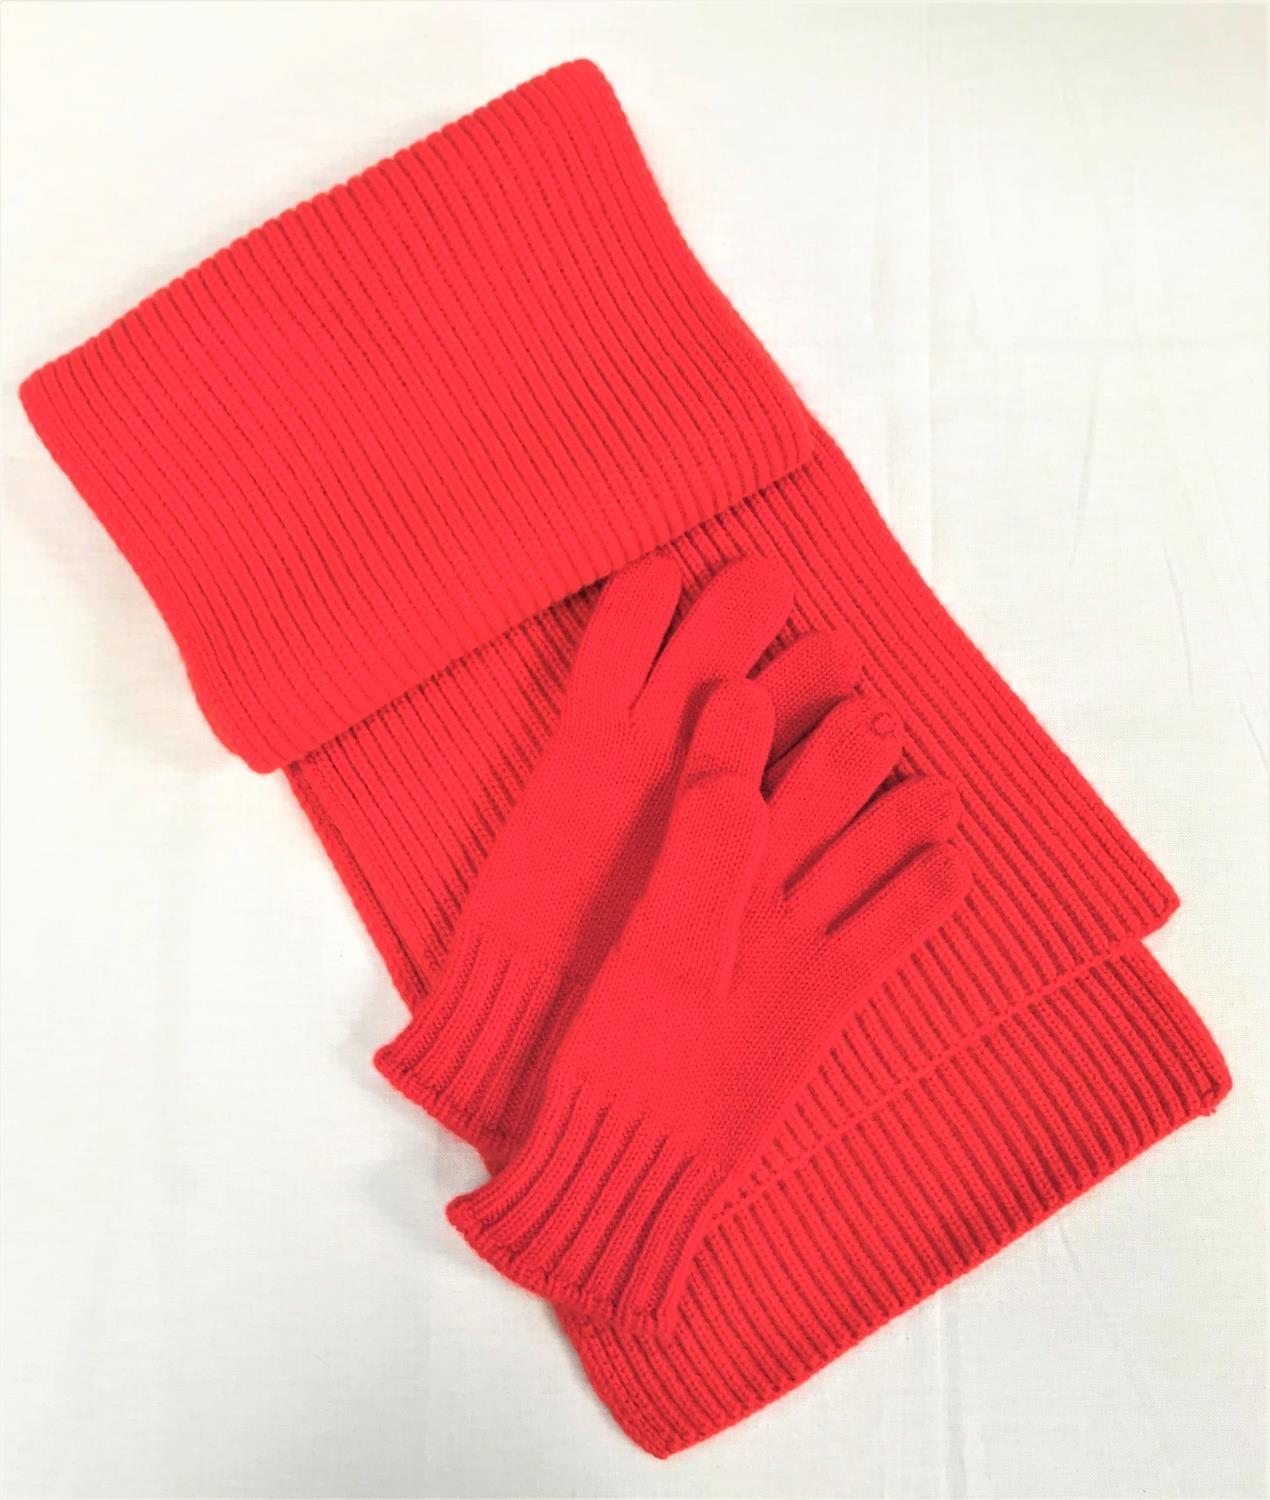 BRIGHT ORANGE RIBBED CASHMERE SCARF with matching cashmere gloves bby McGeorge of Scotland (size